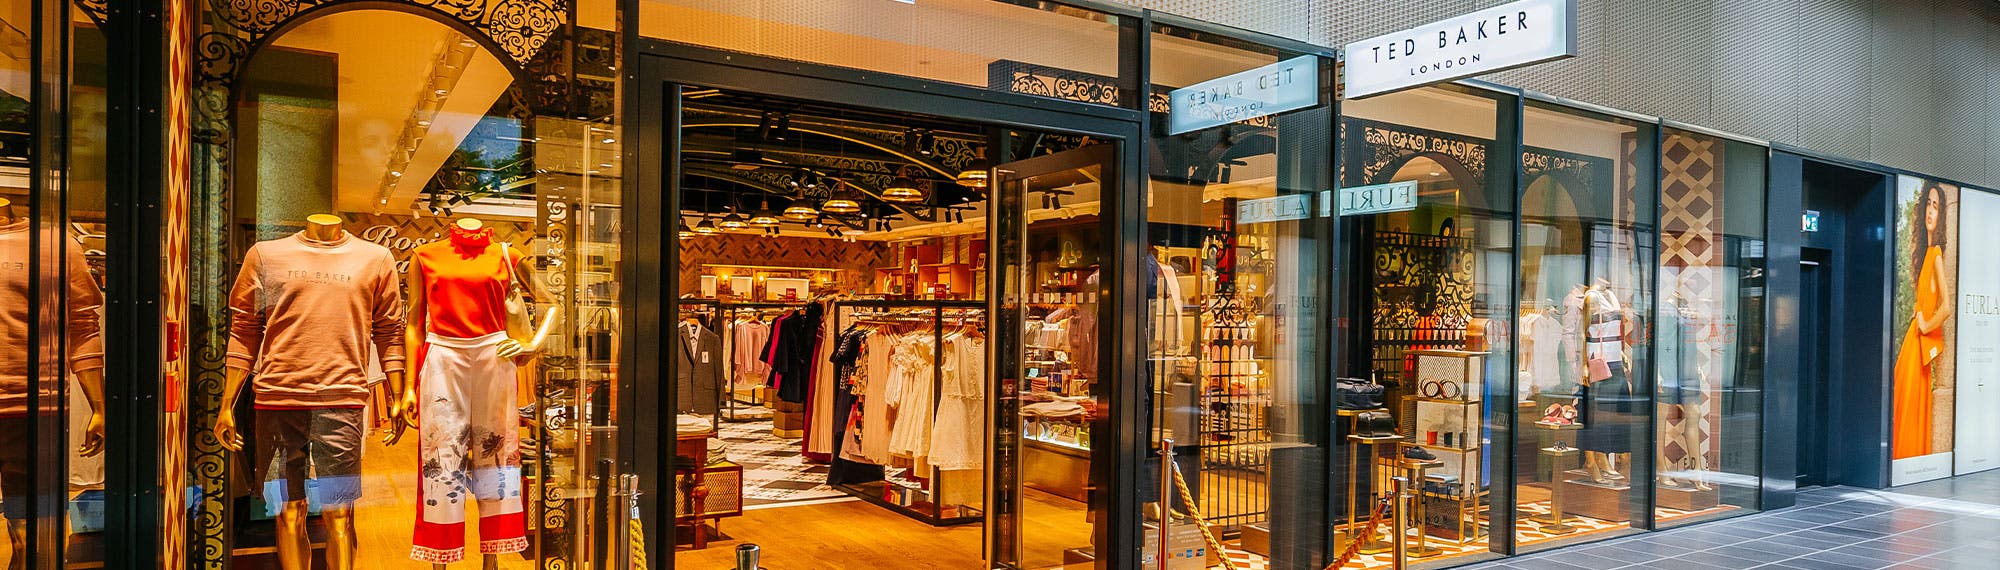 Ted Baker OUTLET in Germany • Sale up to 70%* off